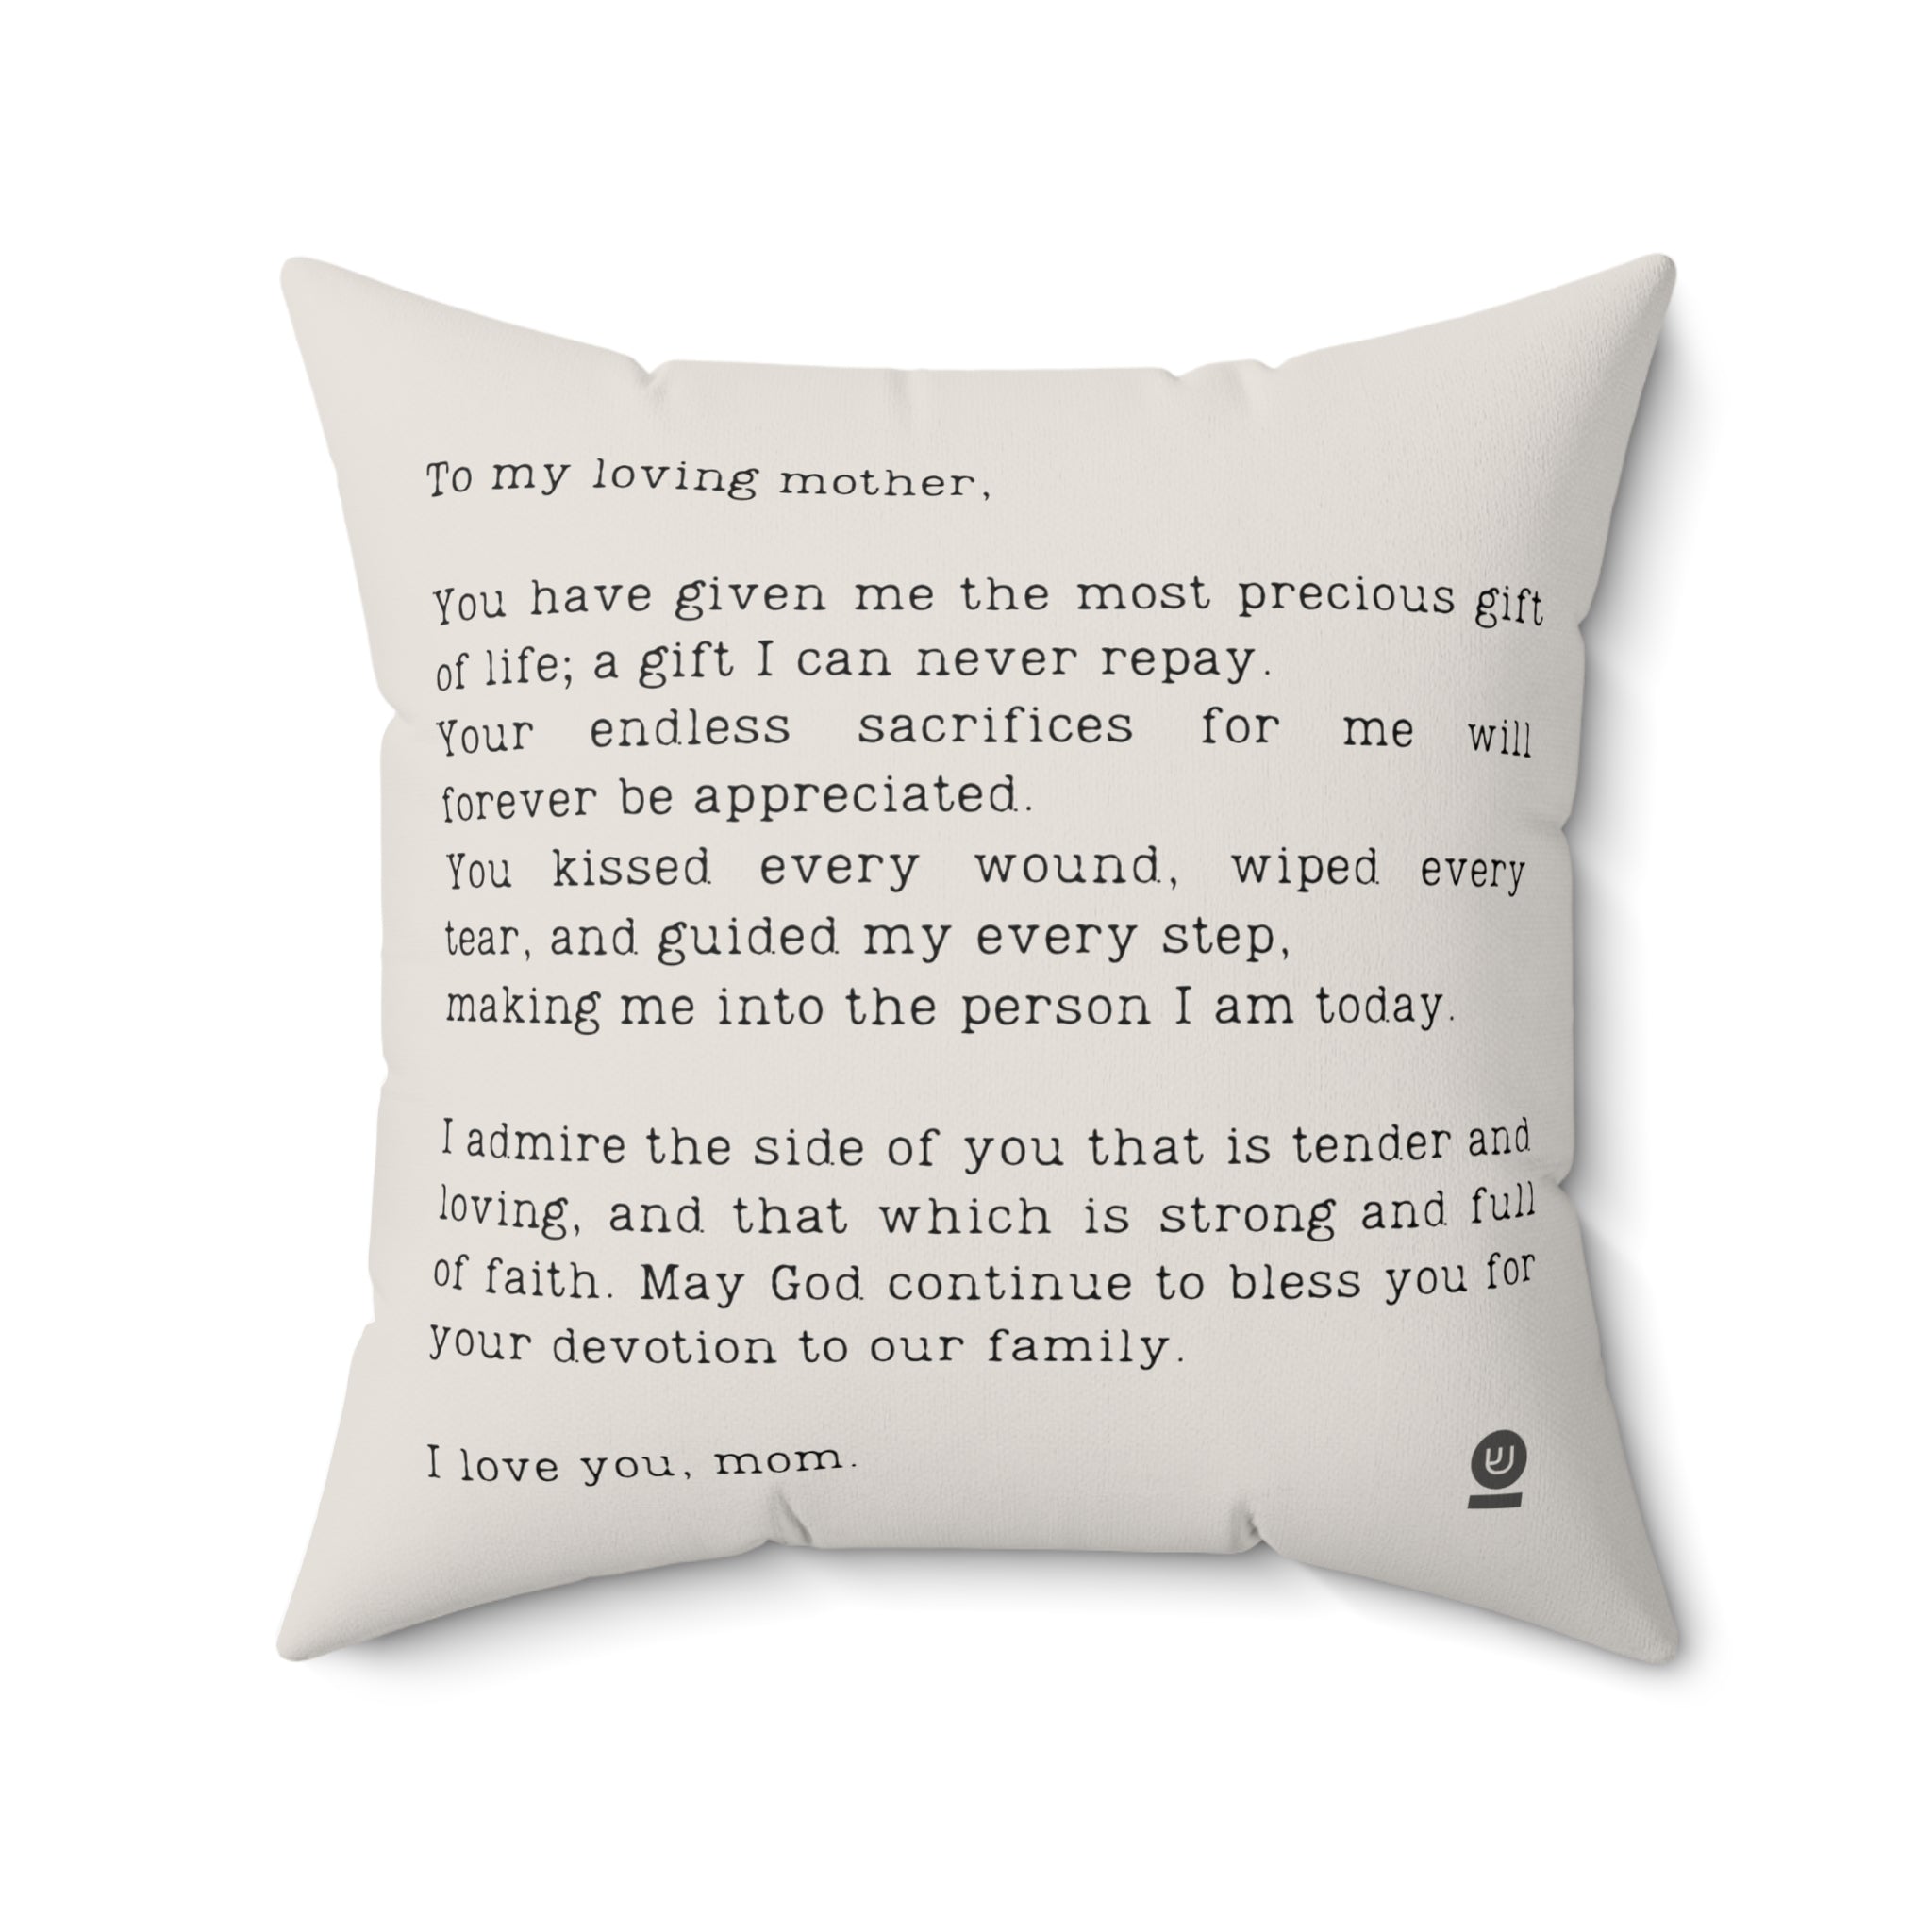 To My Loving Mother - Spun Polyester Square Pillow